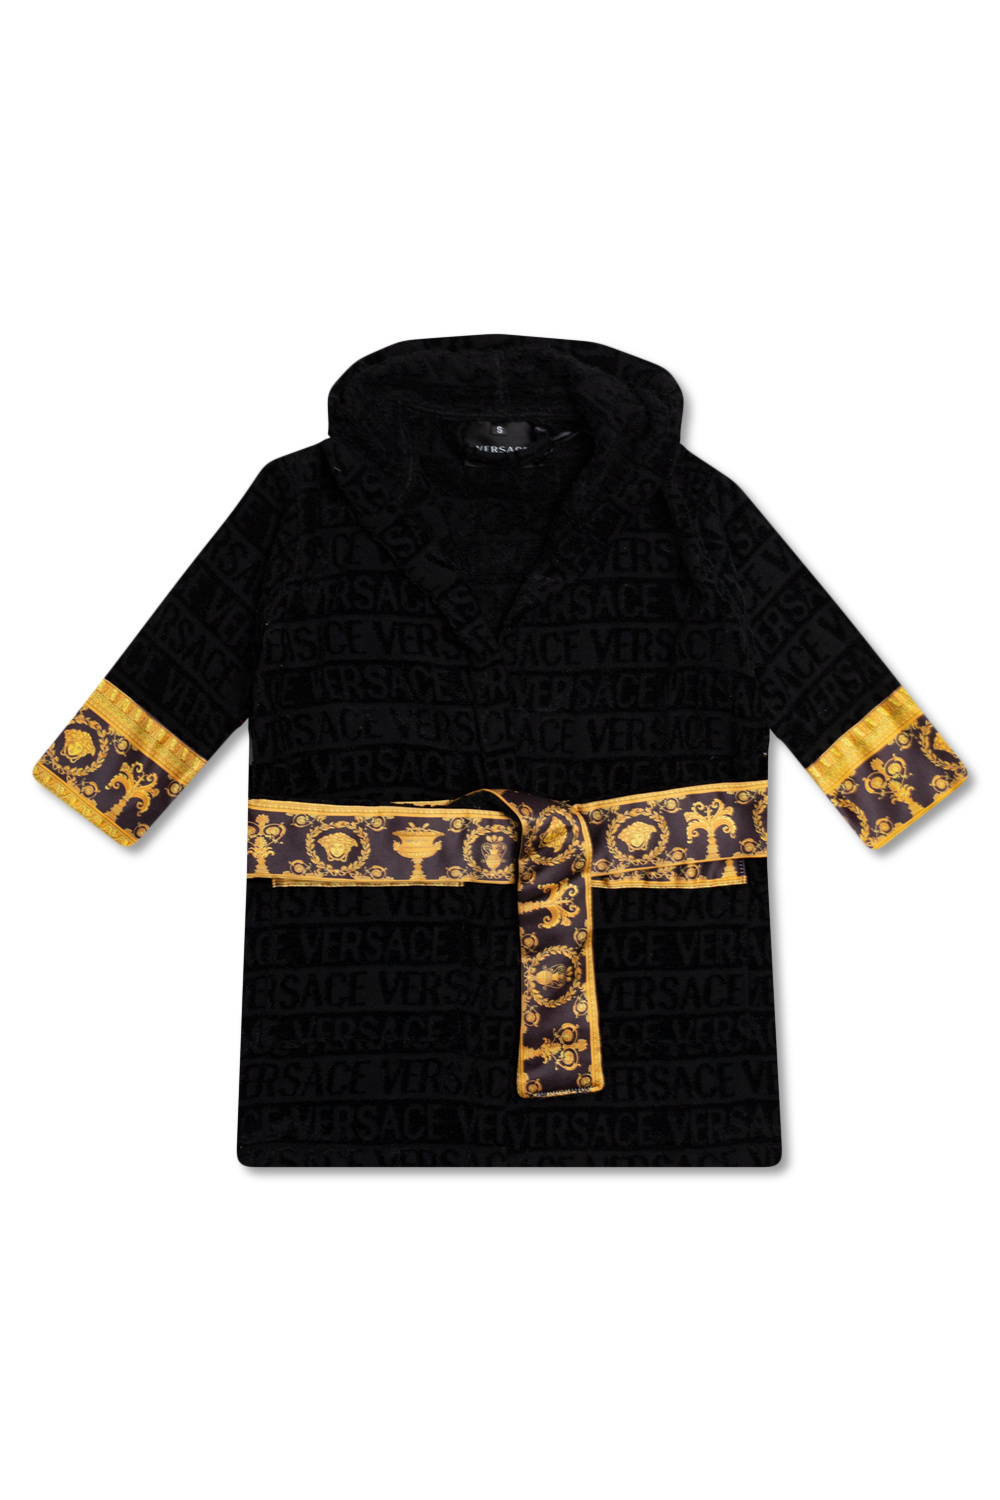 Versace Kids Boys clothes 4-14 years